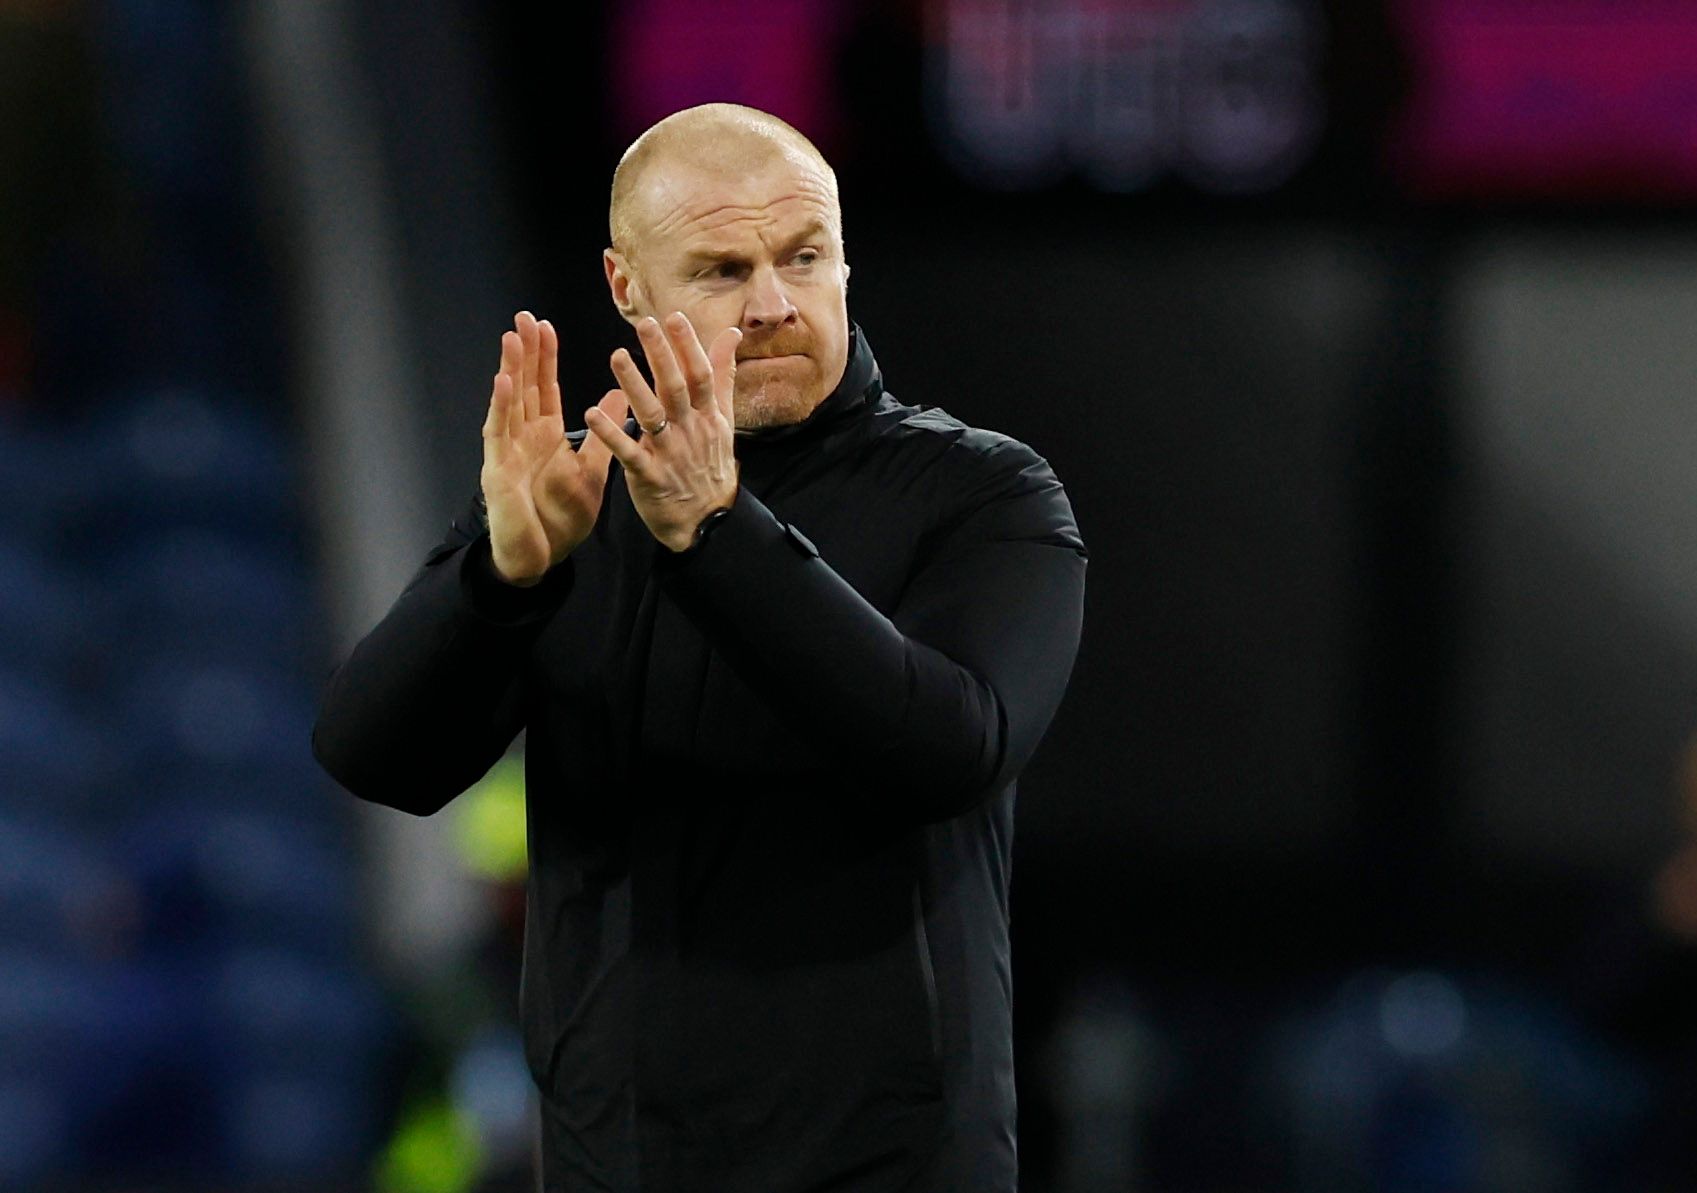 Rangers: Sean Dyche could be a manager ‘target’ -Rangers News